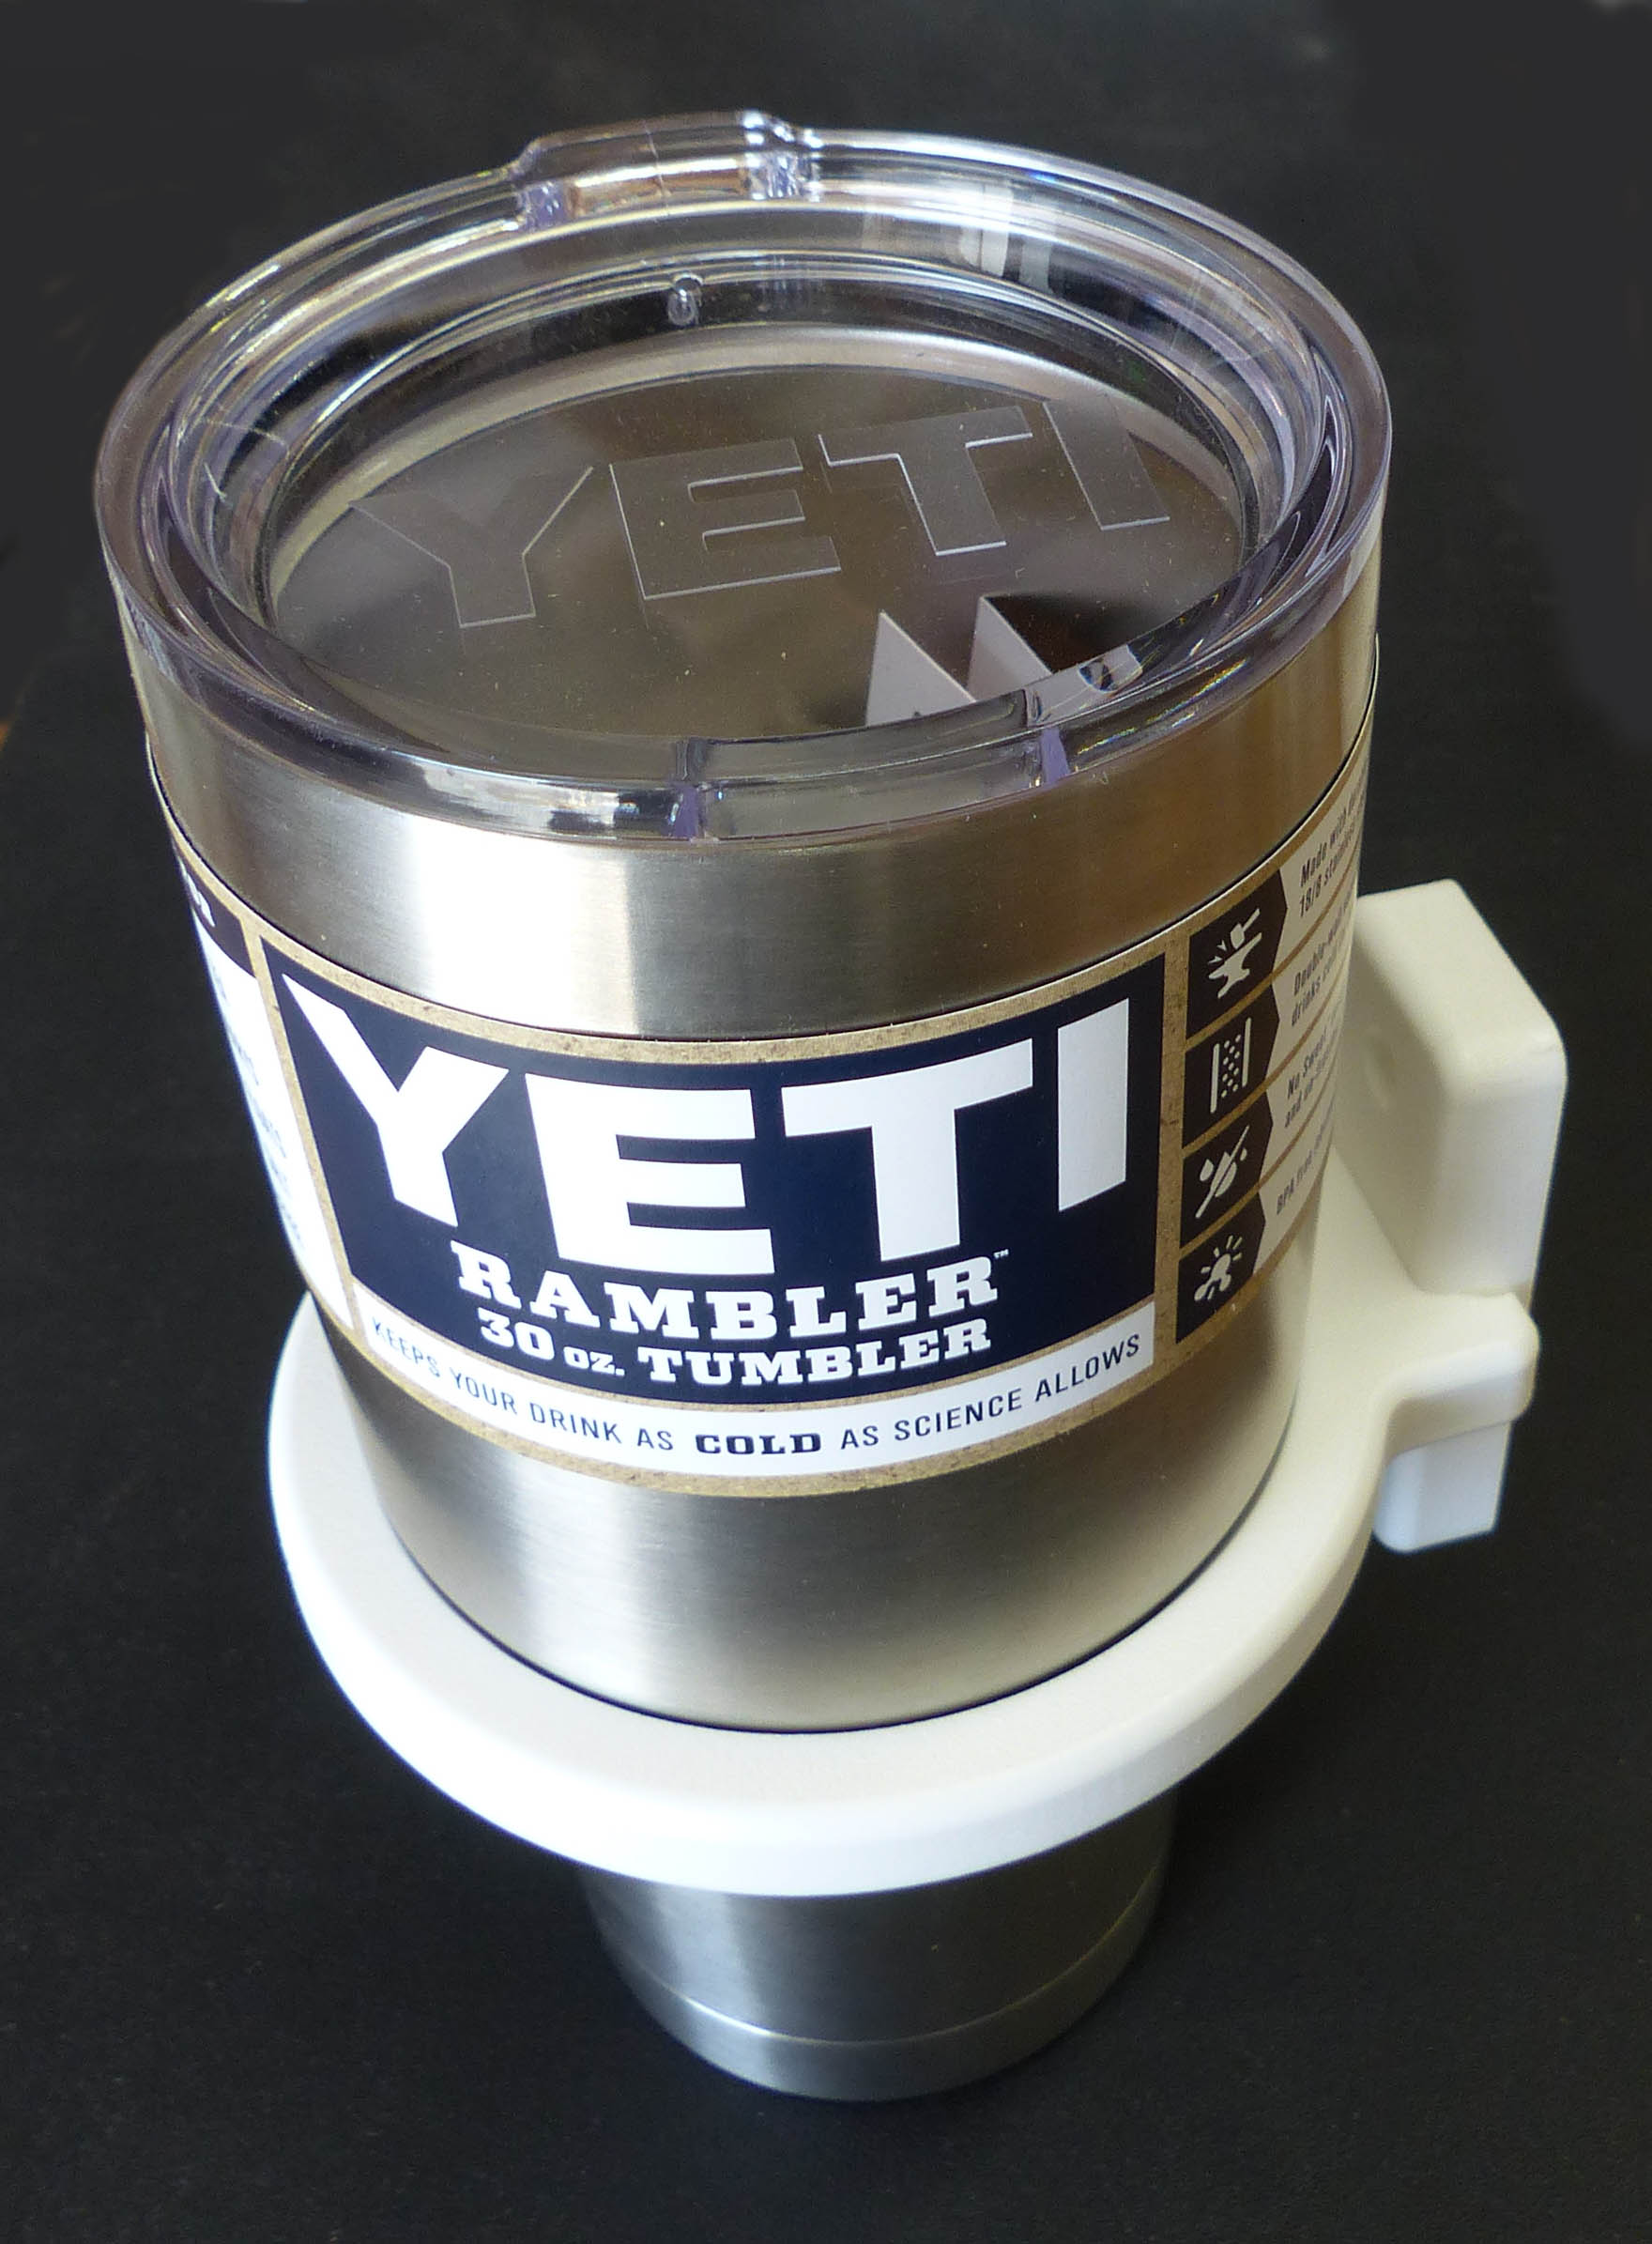 yeti cup holder for bike